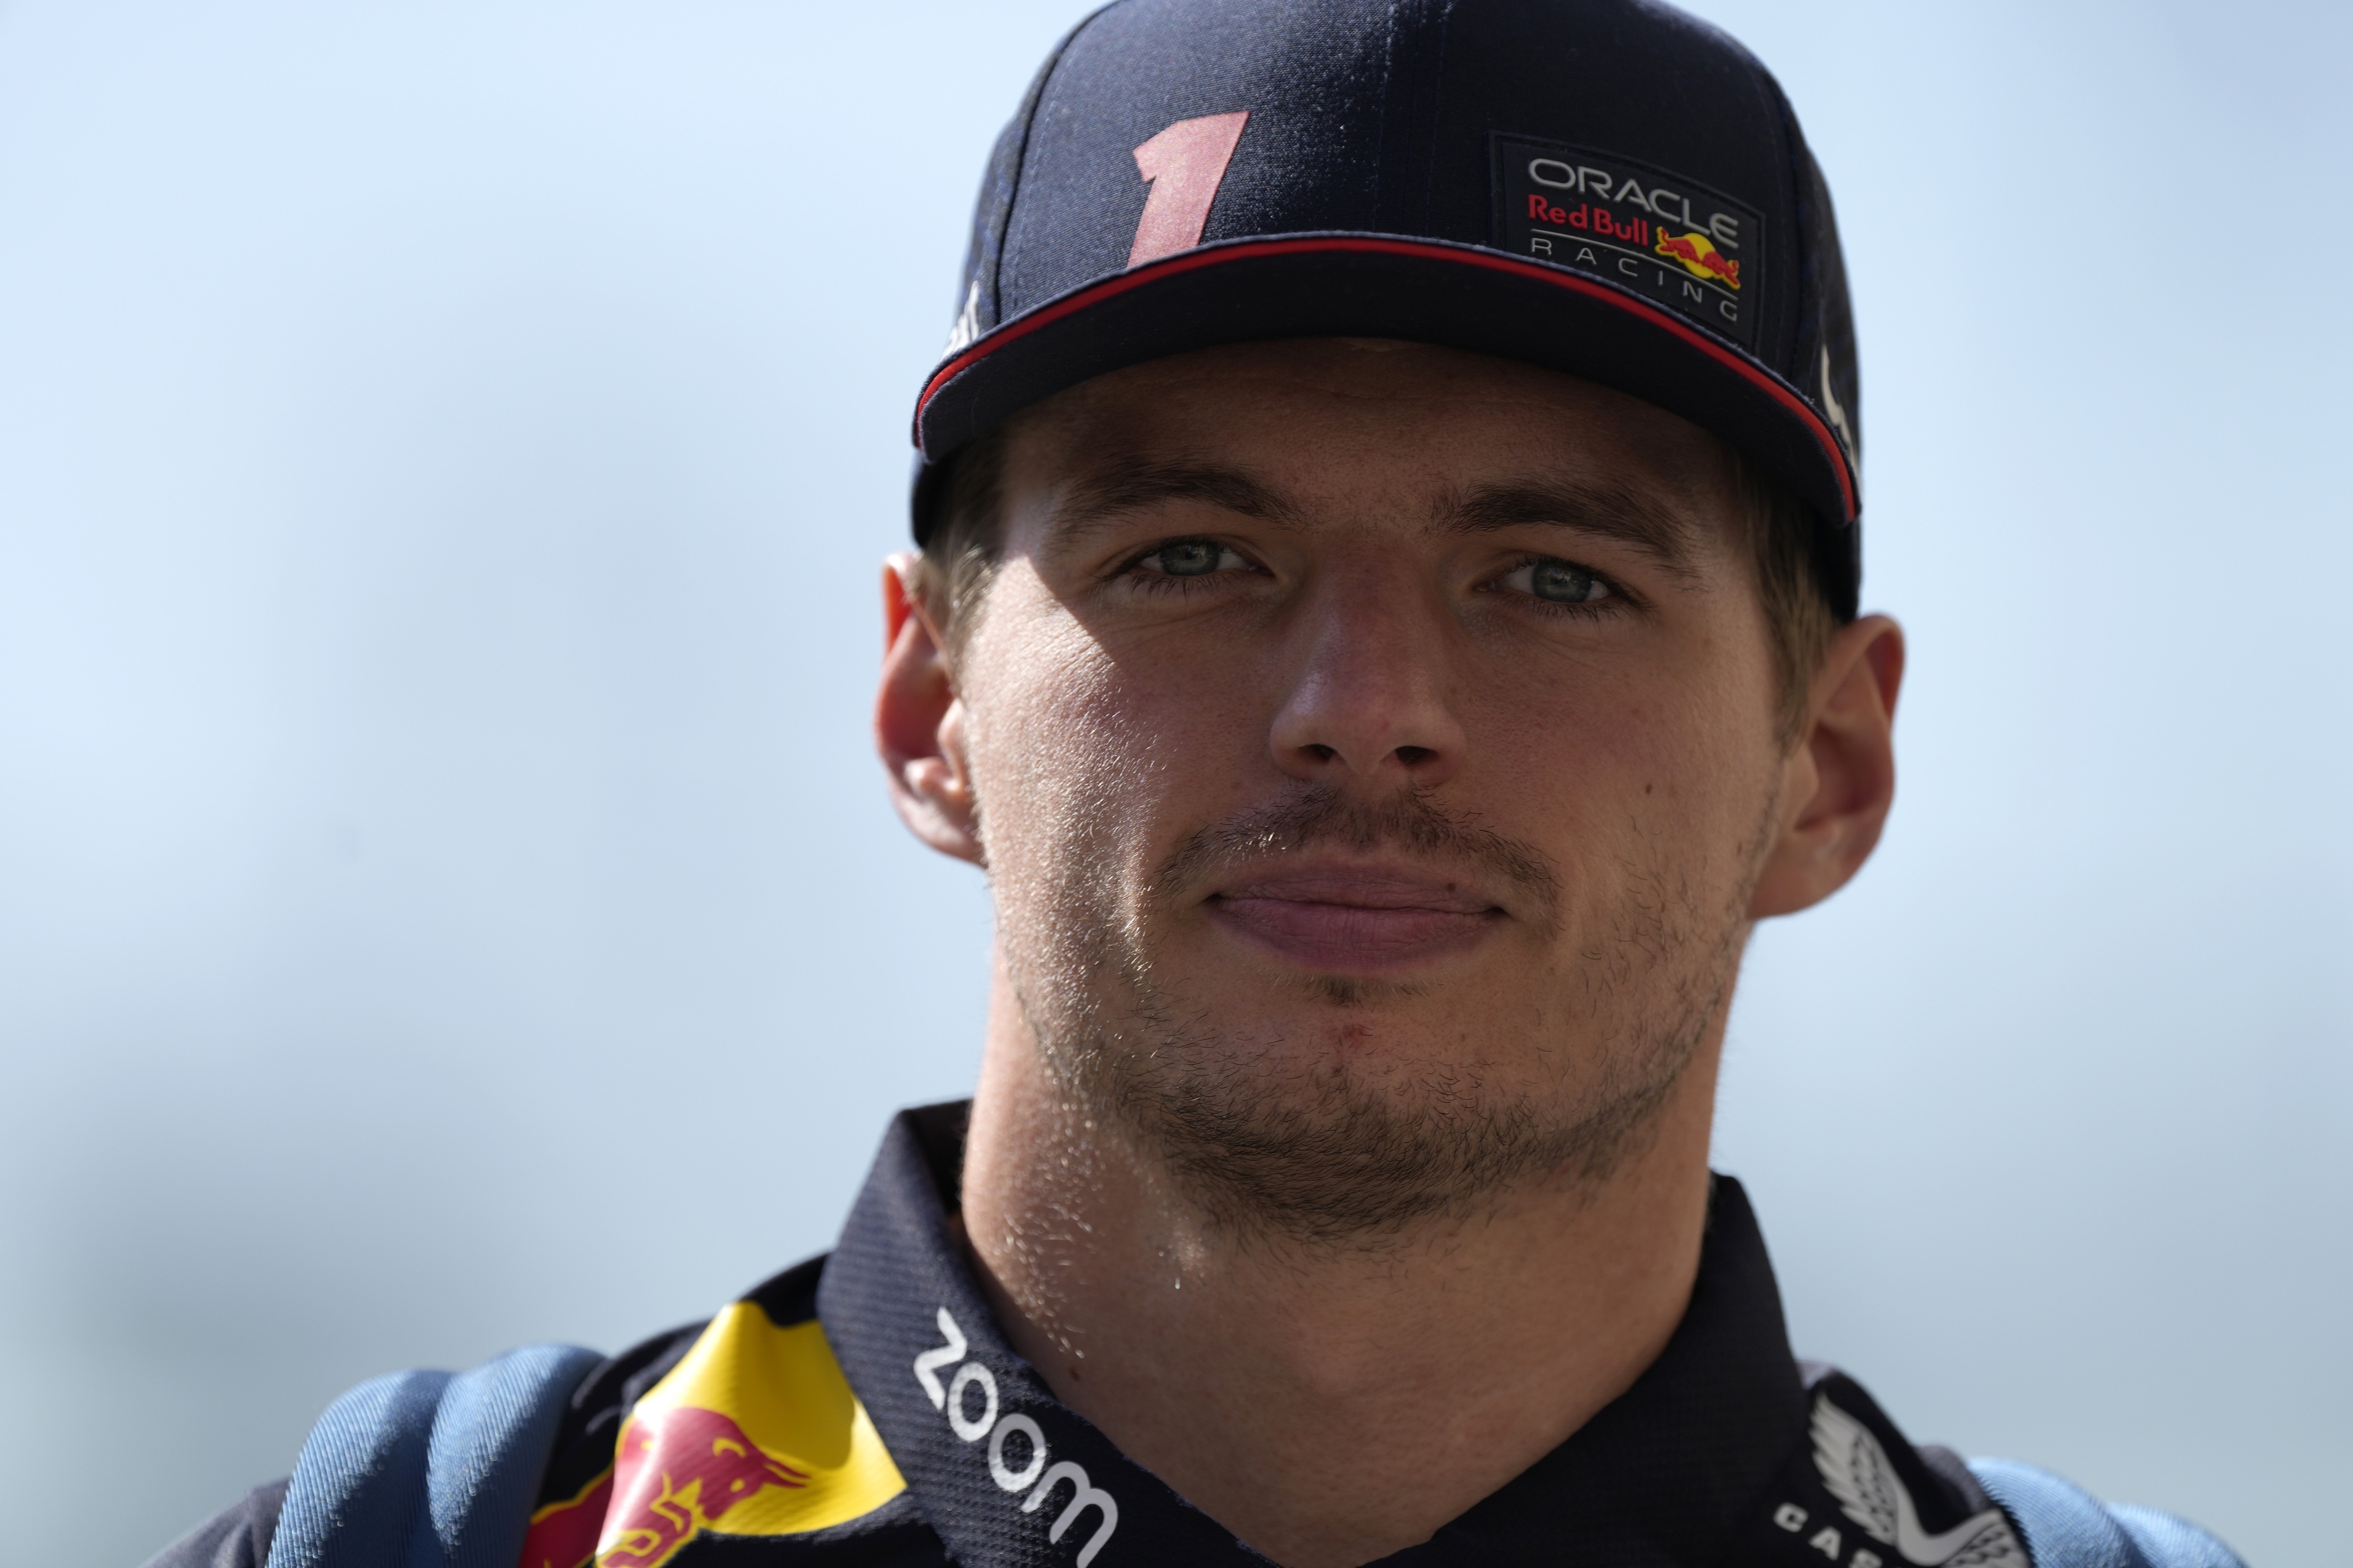 milestone season-ending | on AP Verstappen offer GP for champion Max Dhabi Another F1 Abu at News